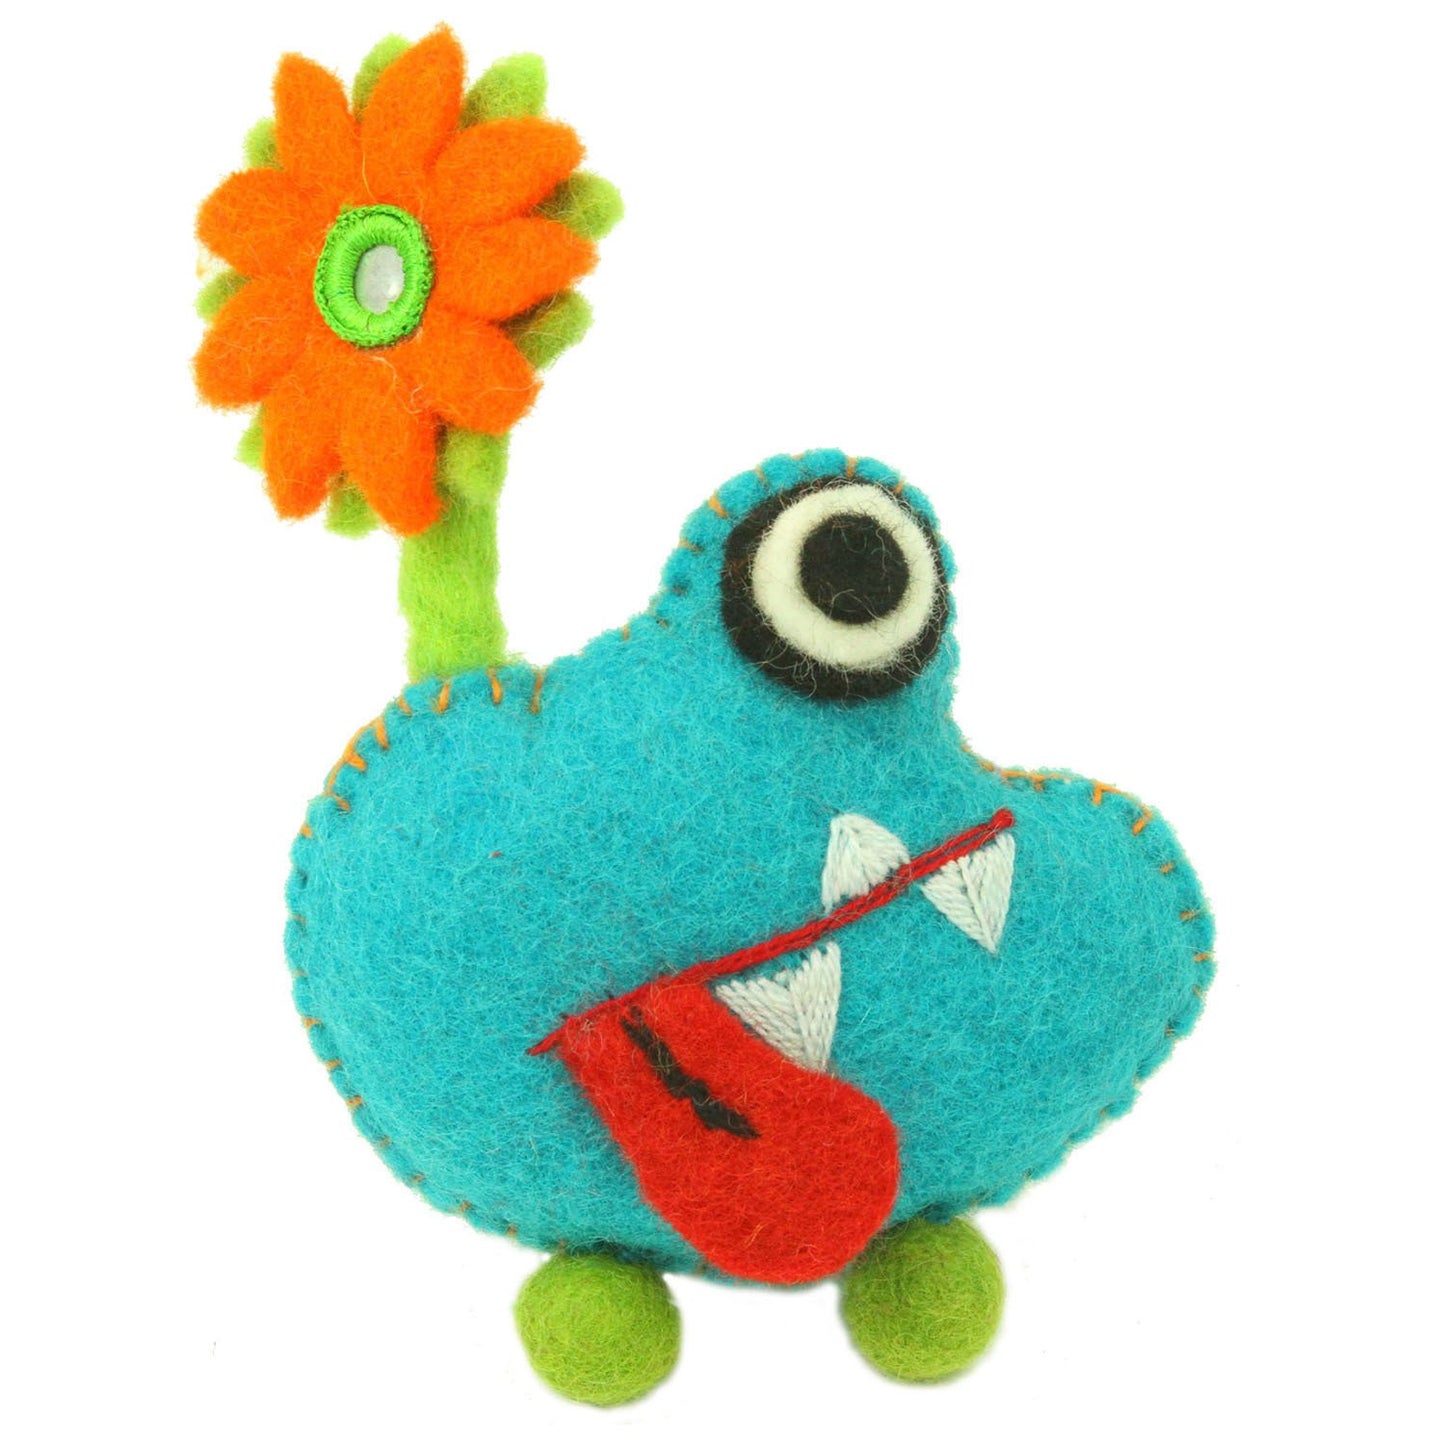 Global Groove Hand Felted Blue Tooth Monster with Flower
Jungle Pillows